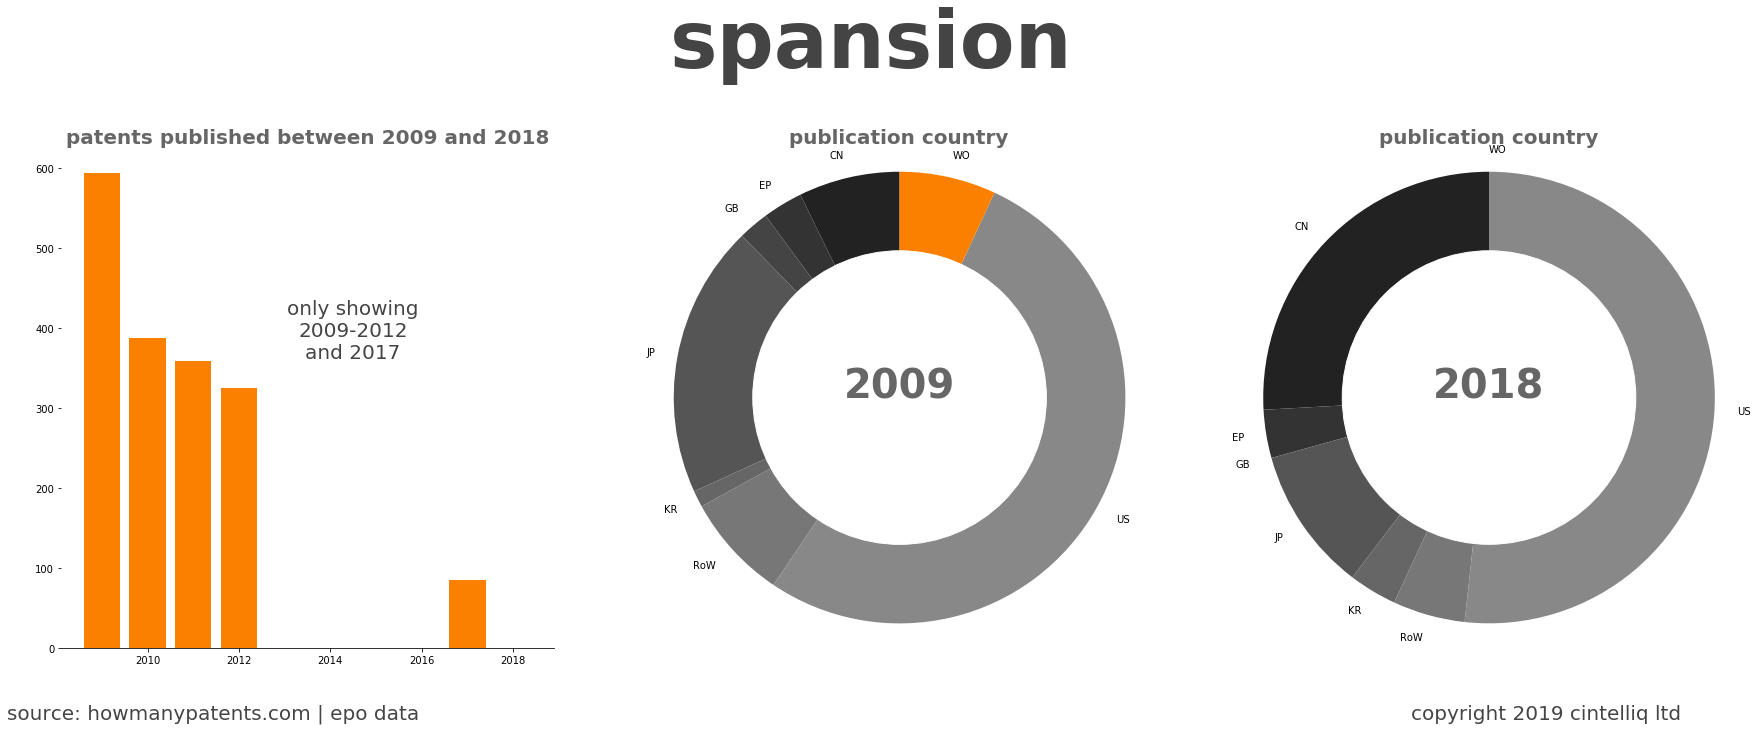 summary of patents for Spansion